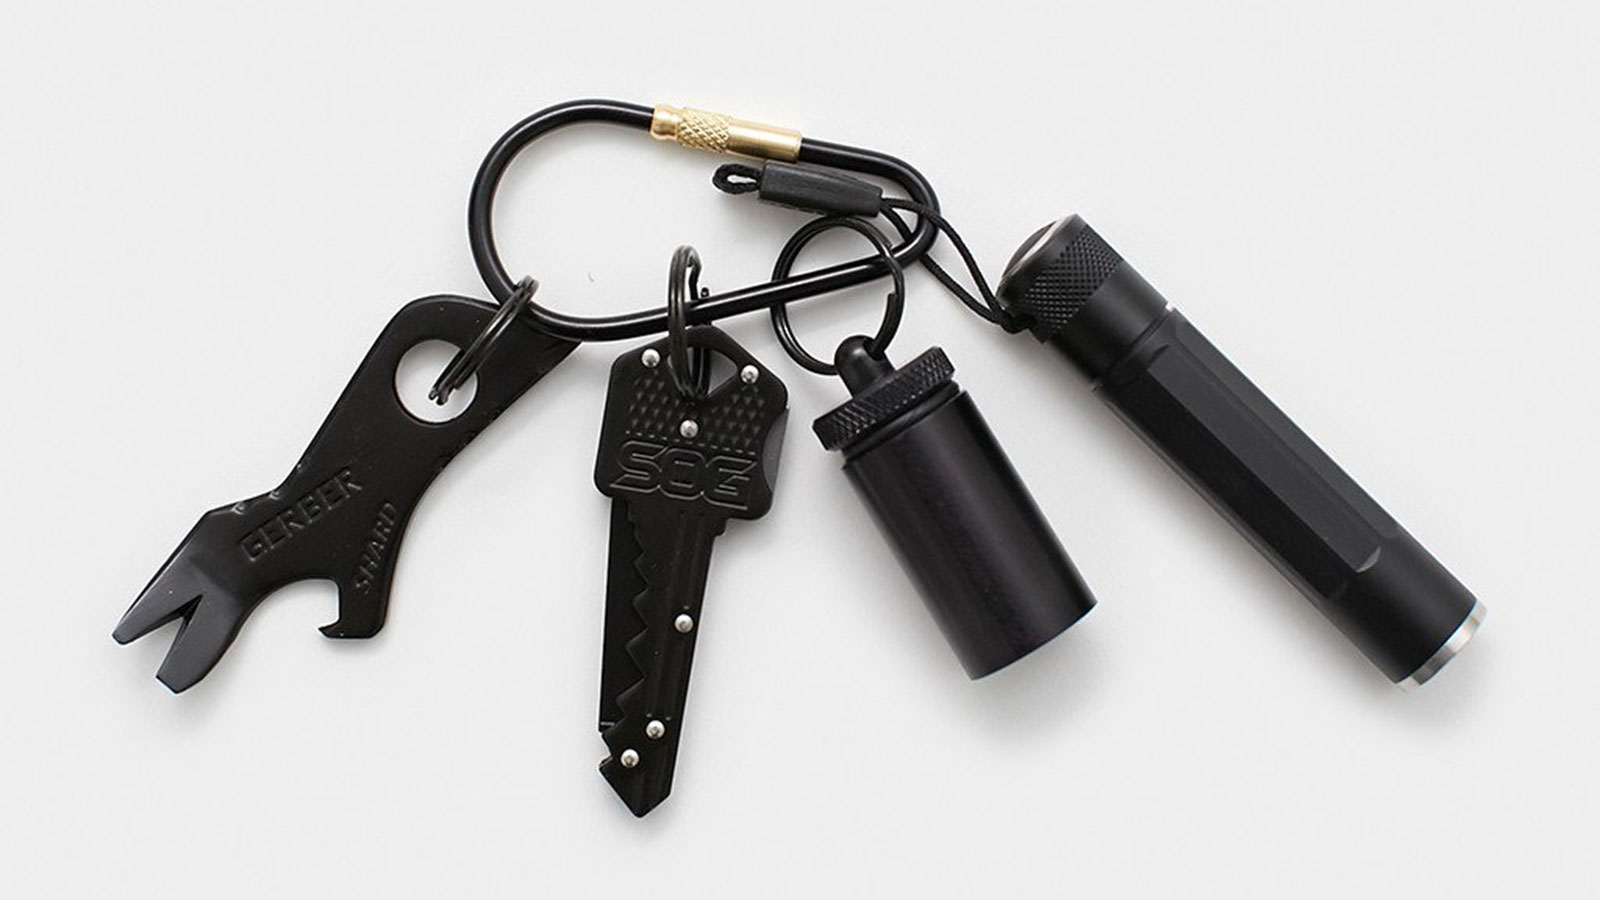 ALL BLACK EDC KIT BY COOL MATERIAL